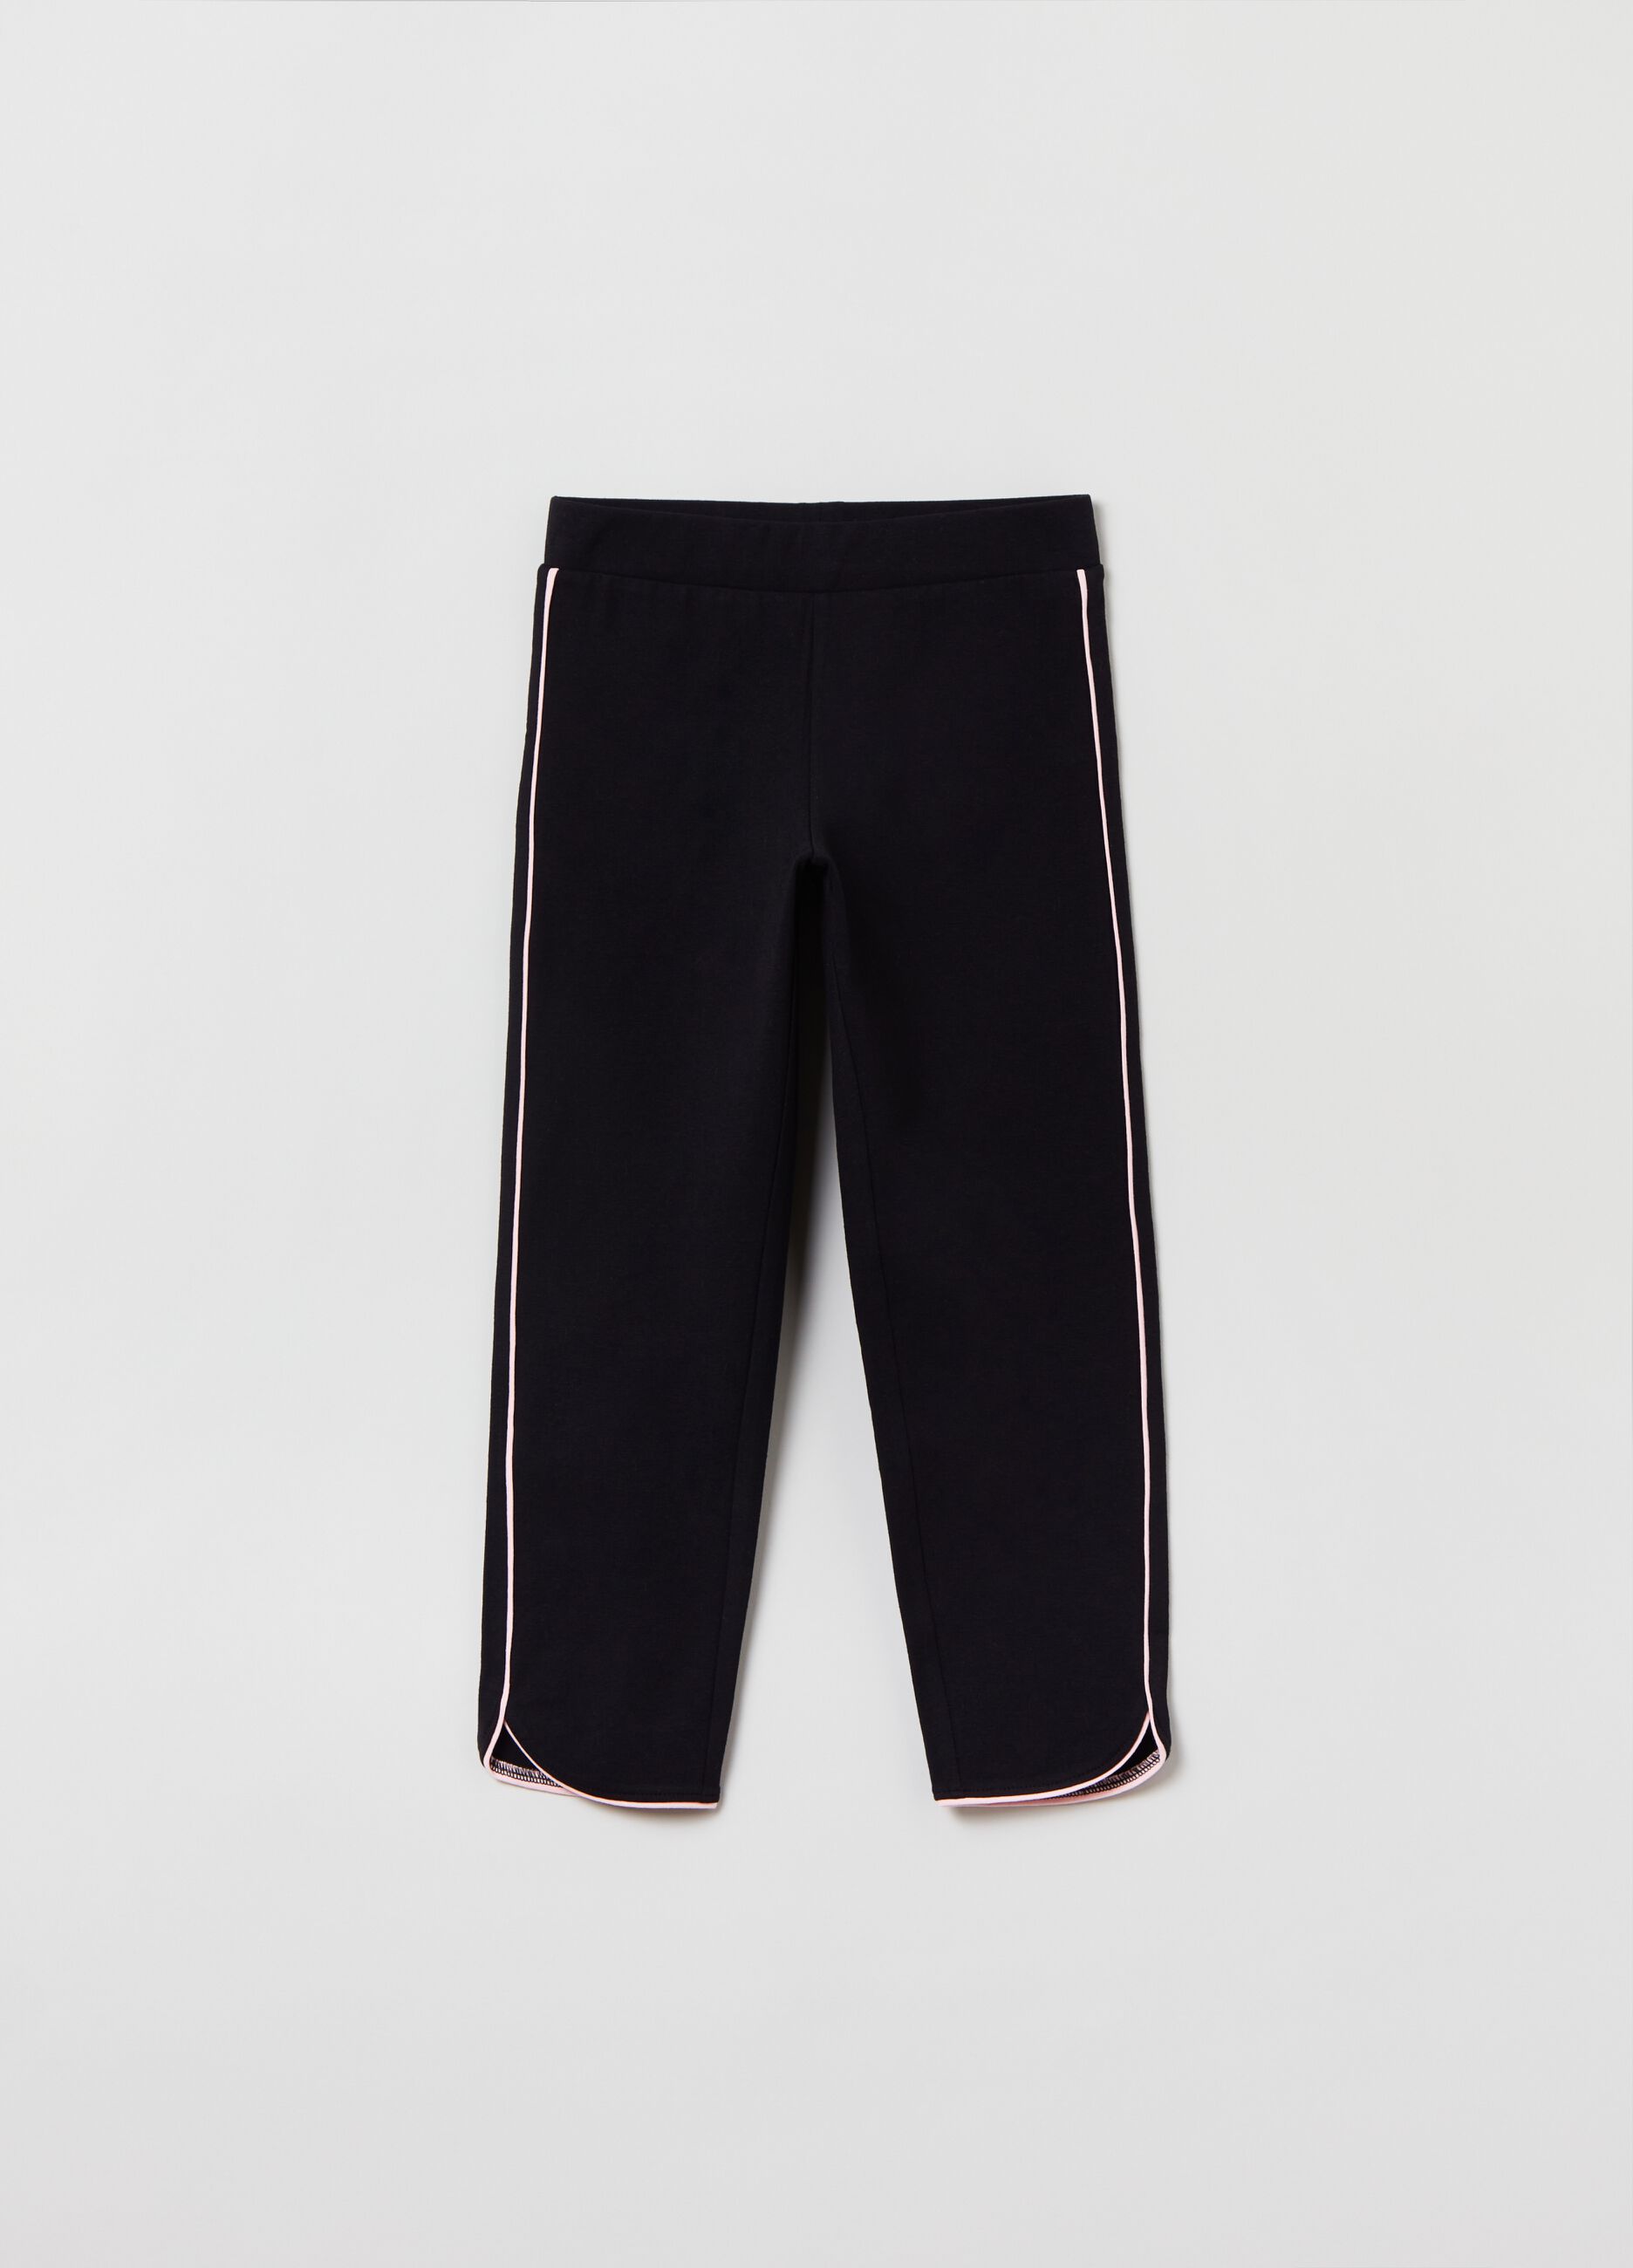 Stretch leggings with contrasting edging